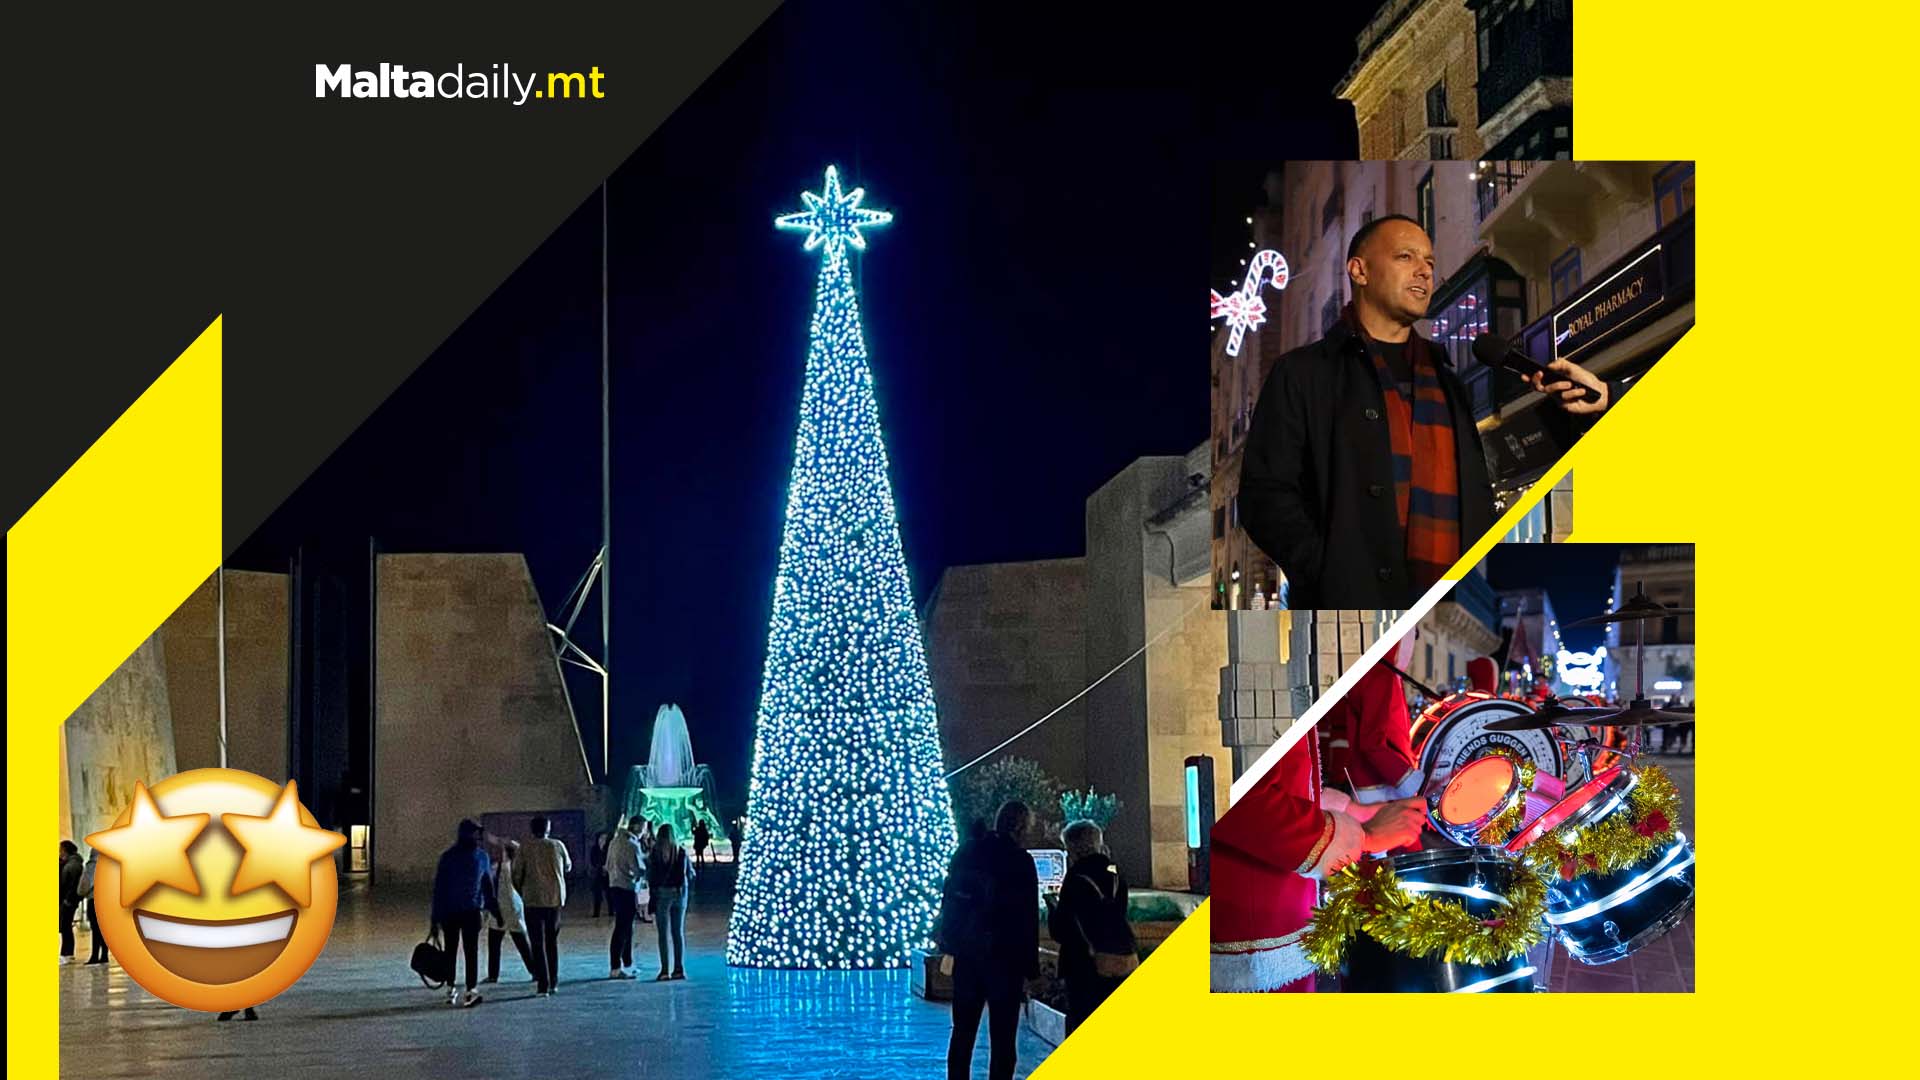 Christmas has come to Valletta as lights decorate the city